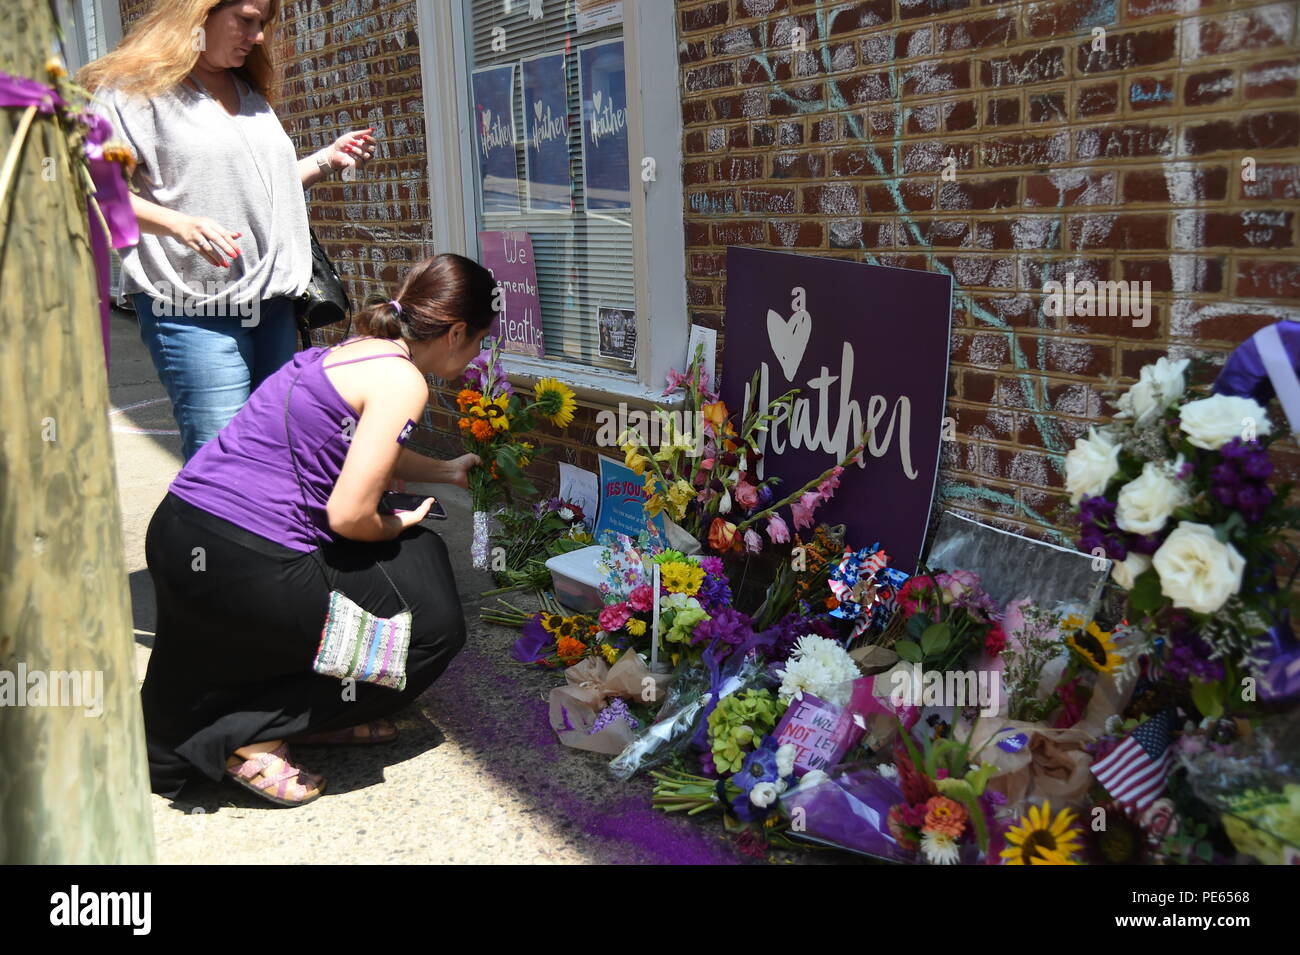 (180812) -- WASHINGTON, Aug. 12, 2018 (Xinhua) -- People pay condolences to Heather Heyer at the street corner where she was killed in Charlottesville, Virginia, the United States, on Aug. 10, 2018. A year after a white nationalist rally traumatized Charlottesville, in the U.S. state of Virginia, with riots and blood, the city is still healing from the shock. On Aug. 12, 2017, white supremacists and members of other hate groups gathered in Charlottesville for a self-styled 'Unite the Right' rally to protest against the city's decision to remove a Confederate statue before clashing violently wi Stock Photo